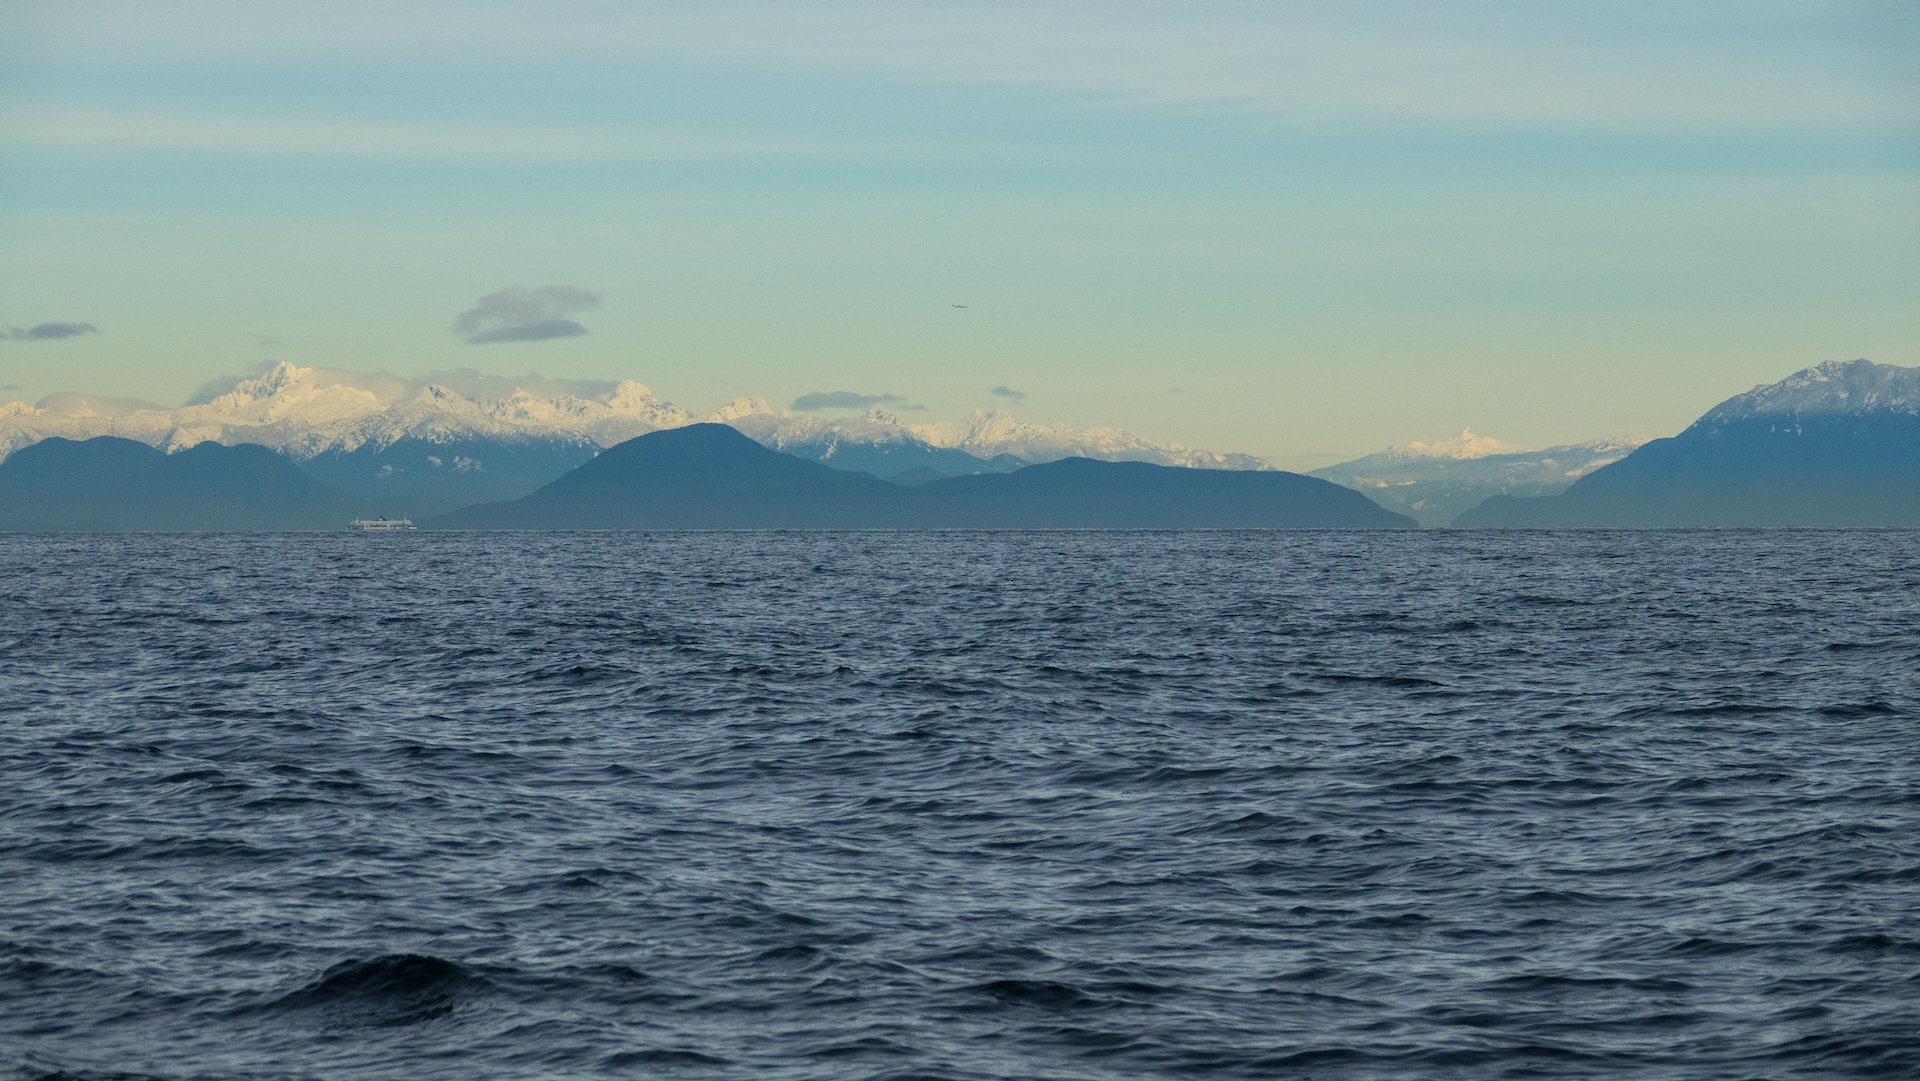  Looking across to the mountains on the mainland.  